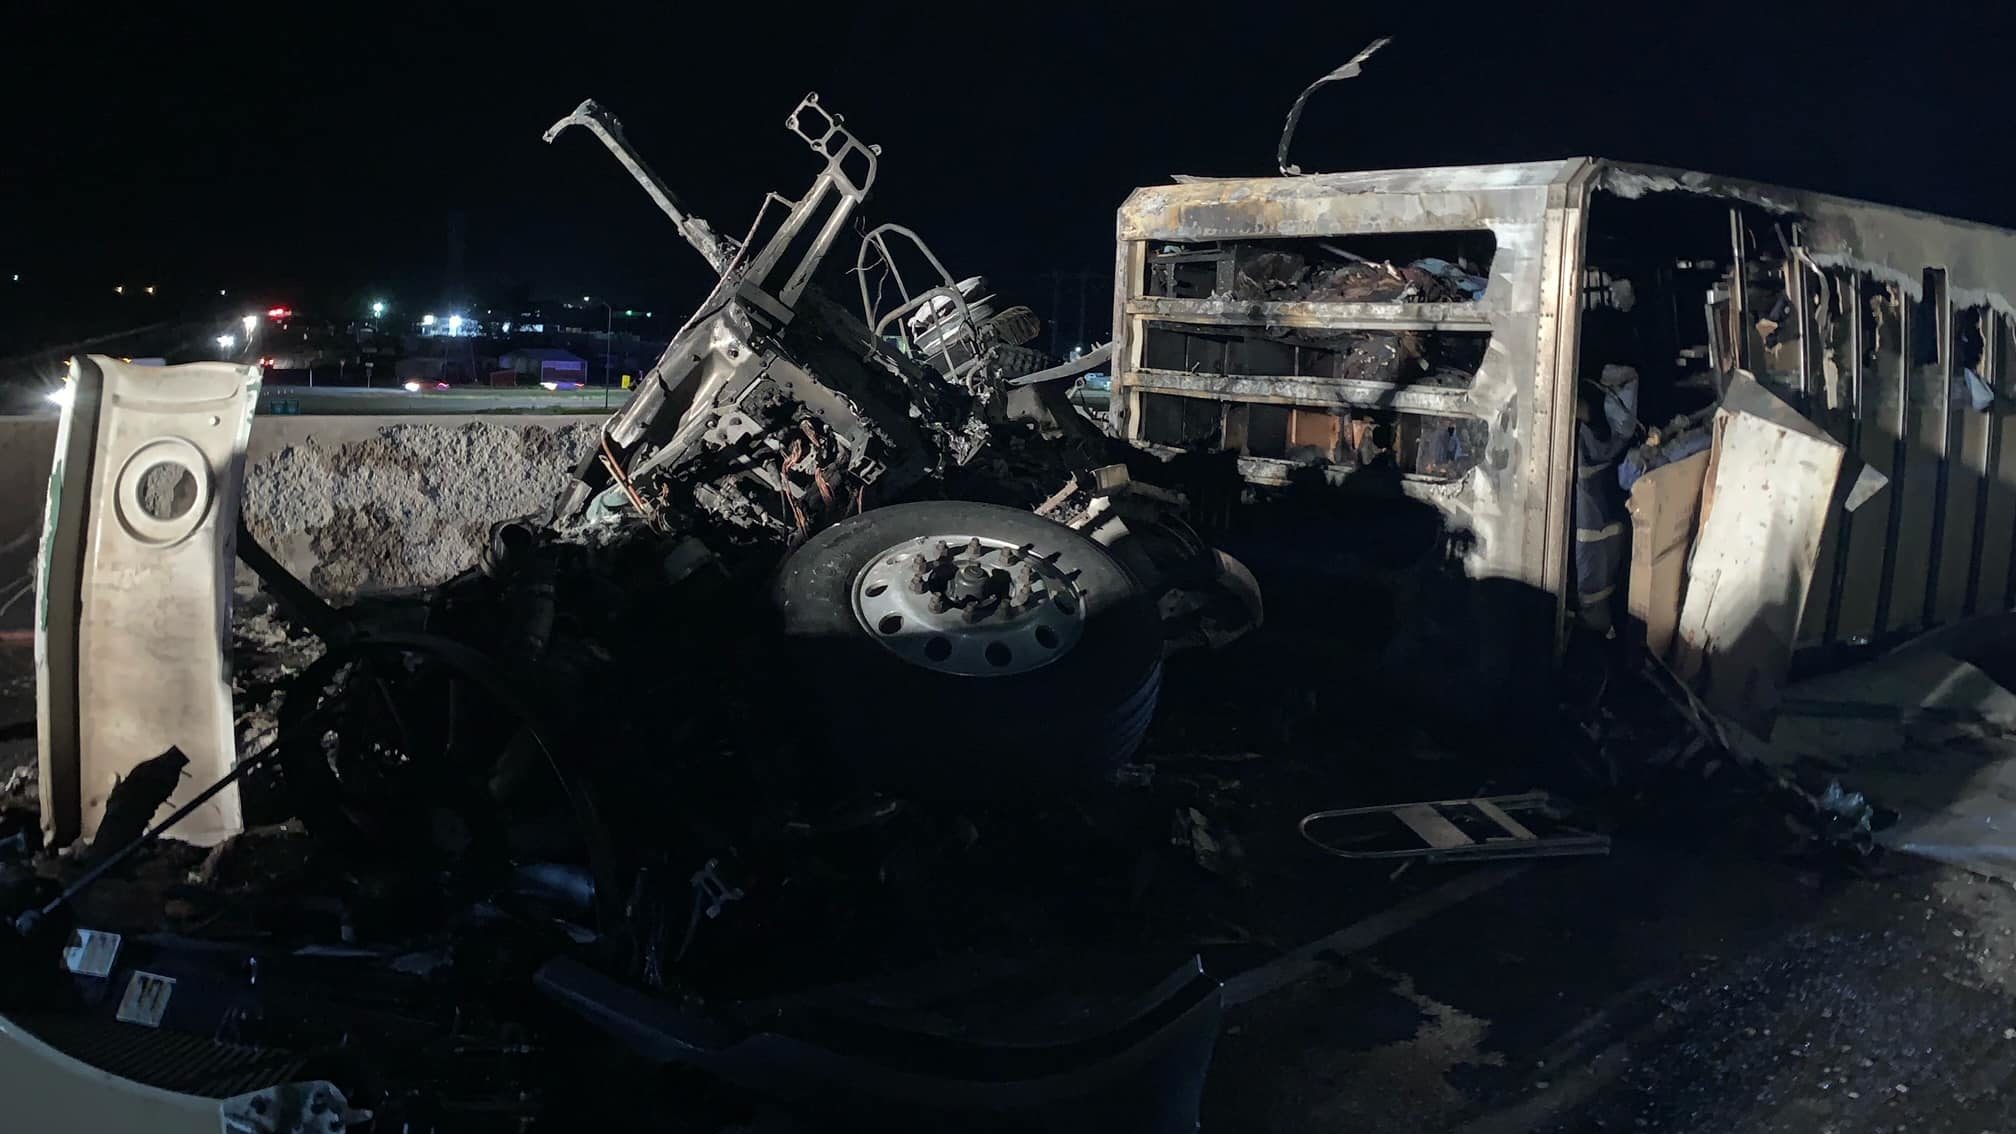 Image of a burned down trailer with blackened car parts...